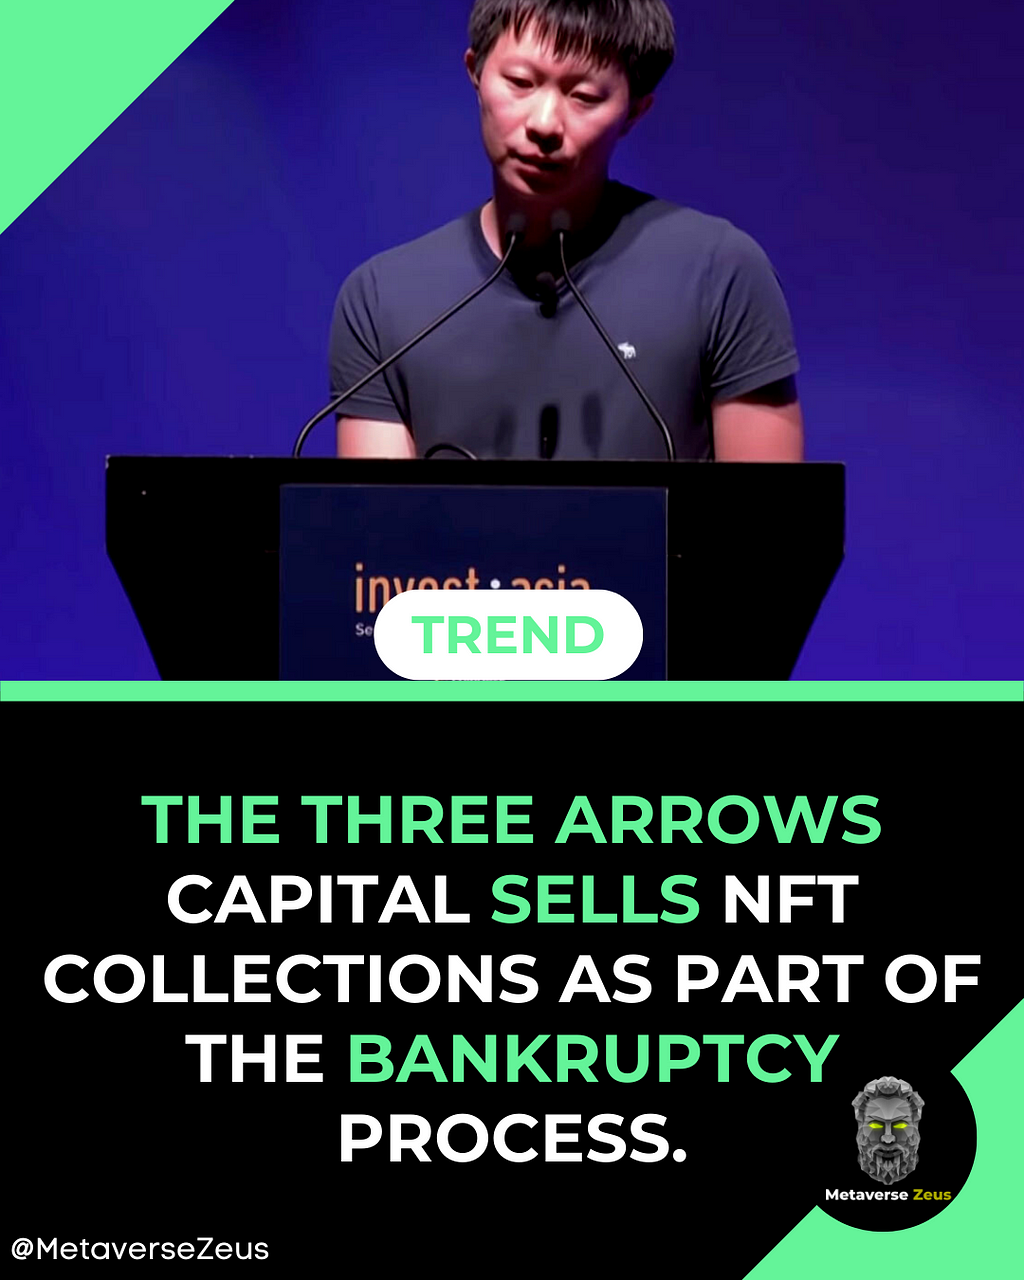 The Three Arrows Capital sells NFT collections as part of the bankruptcy process.